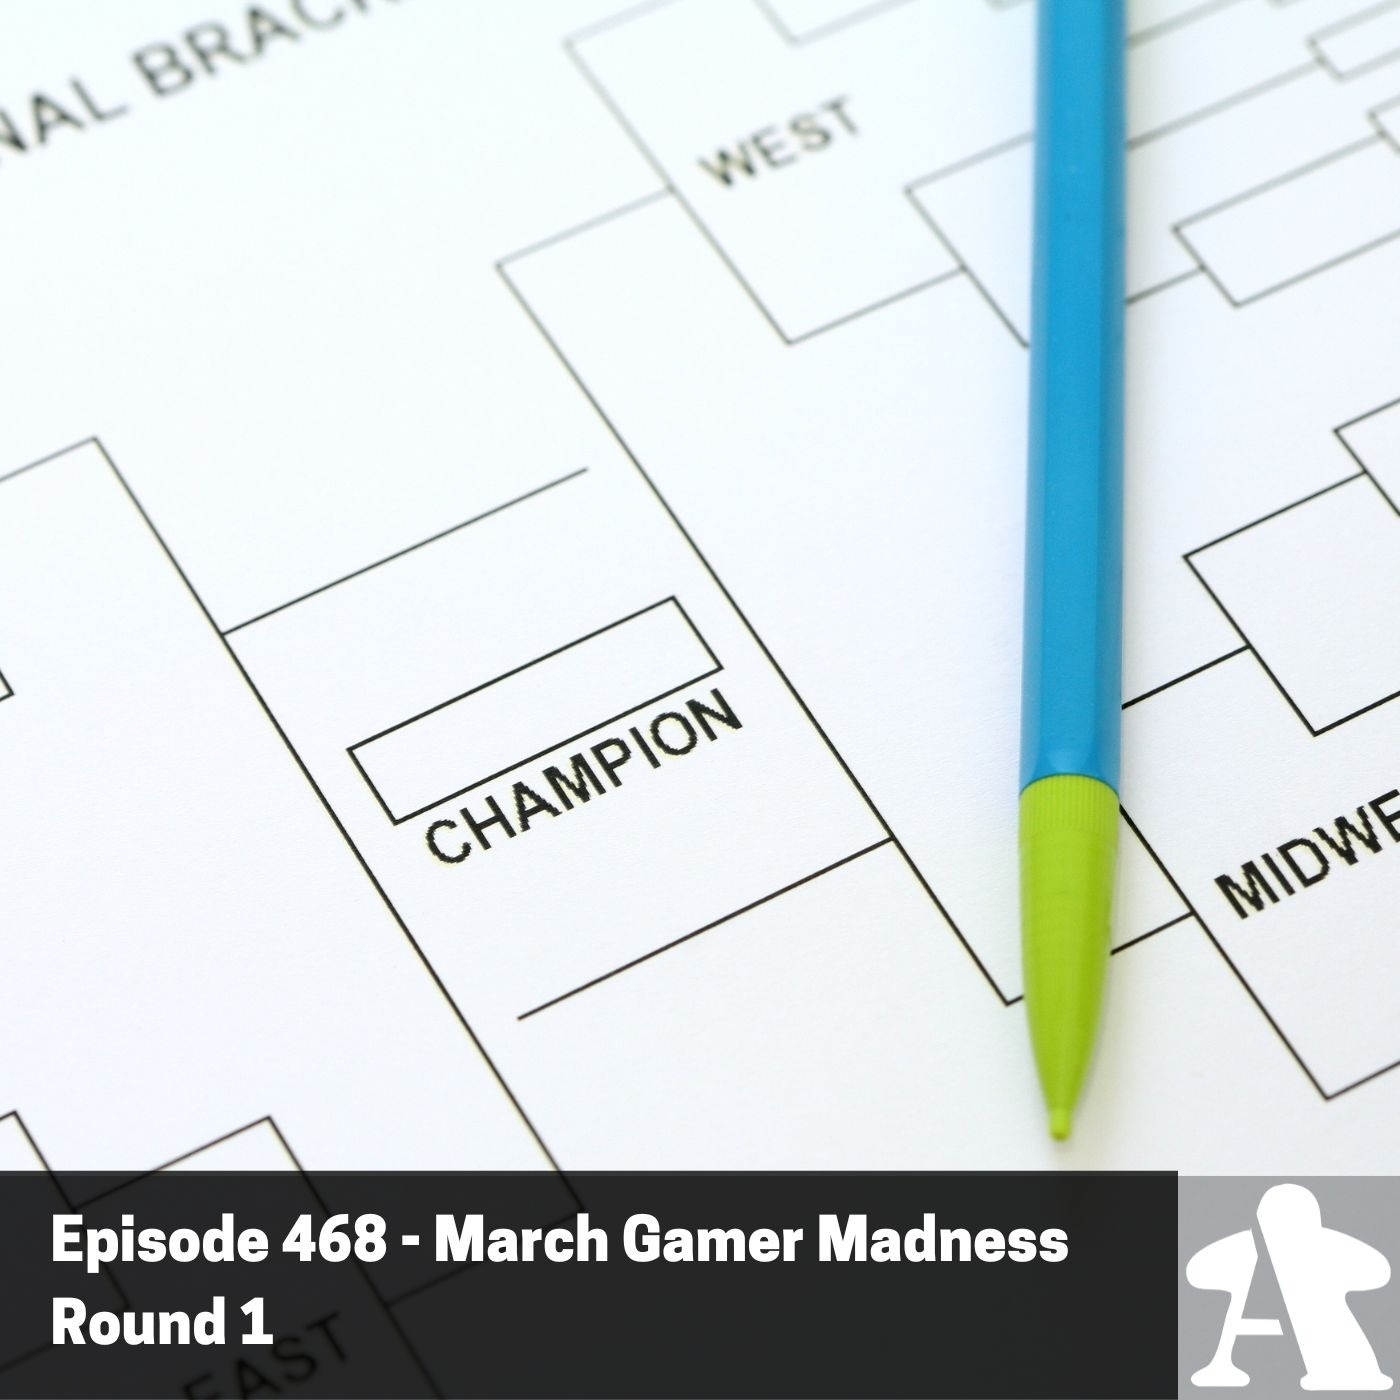 Episode 468 - March Gamer Madness Round 1